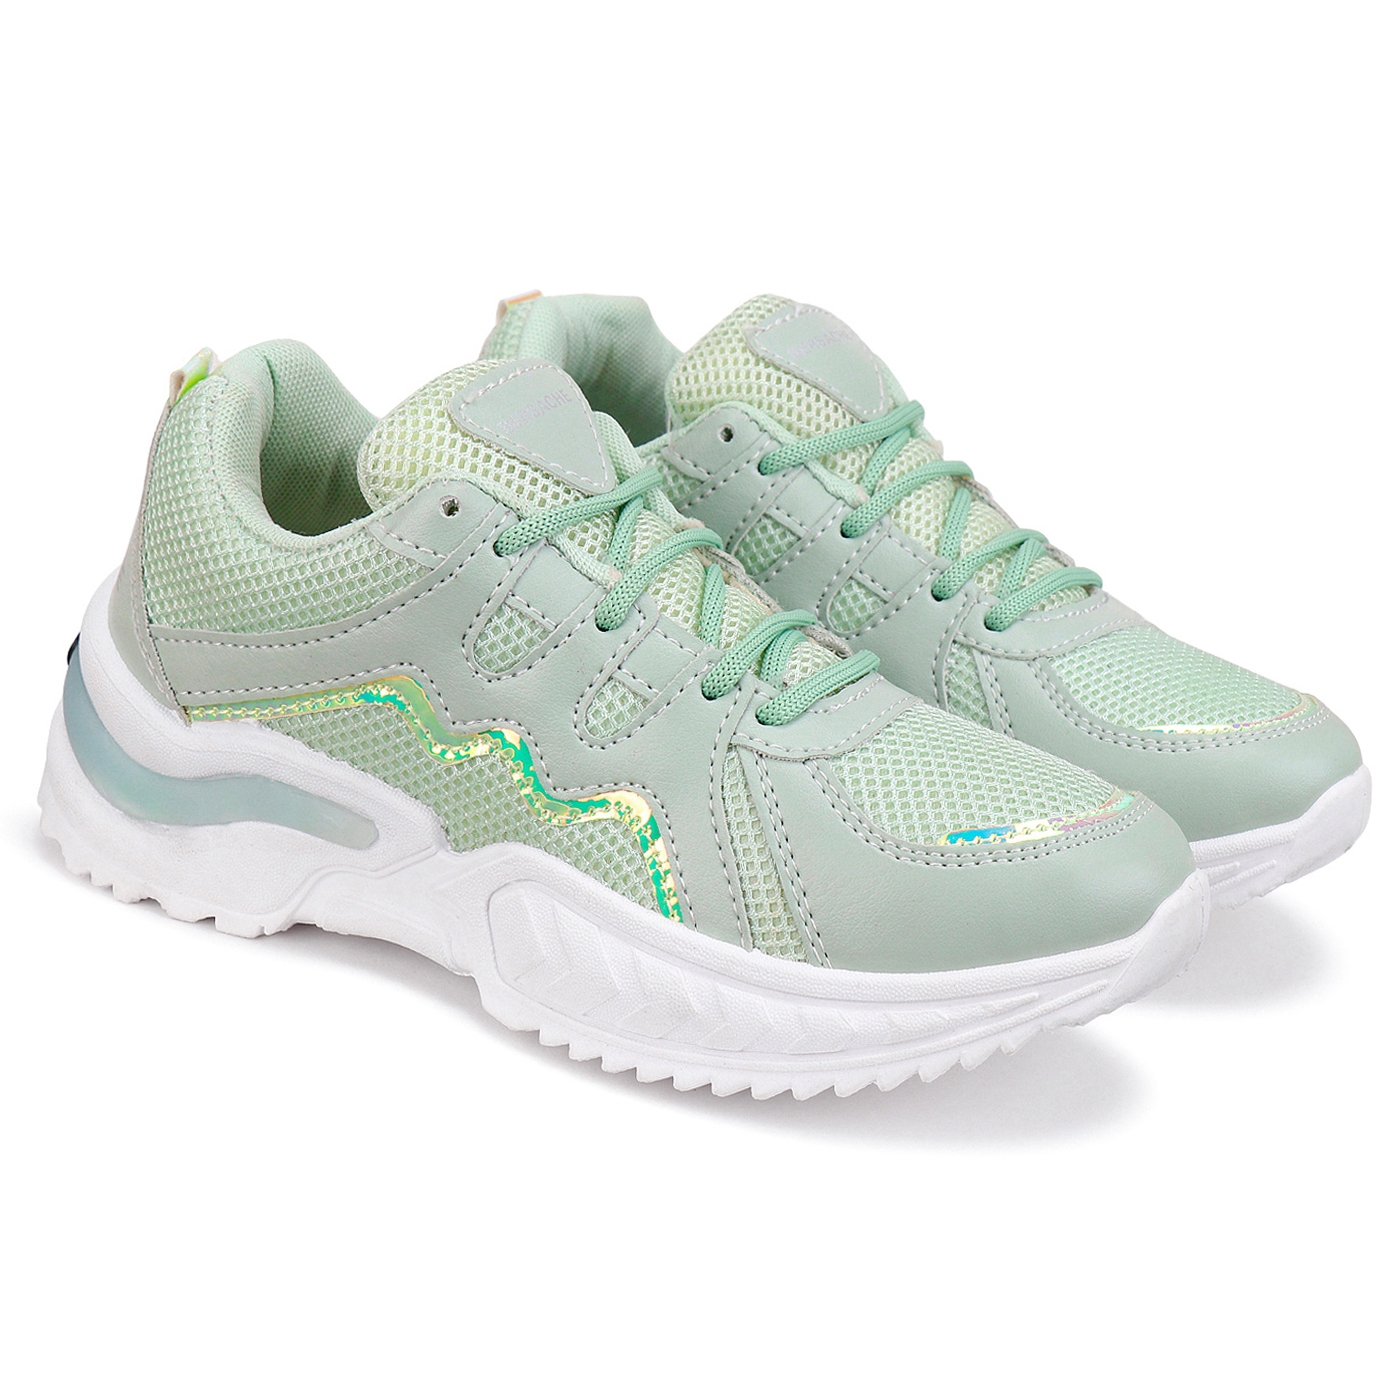 Bersache Sports Shoes For Women | Latest Stylish Sports Shoes For Women | Lace-Up Lightweight (Green) Shoes For Running, Walking, gym ,Trekking and hiking Shoes For Women